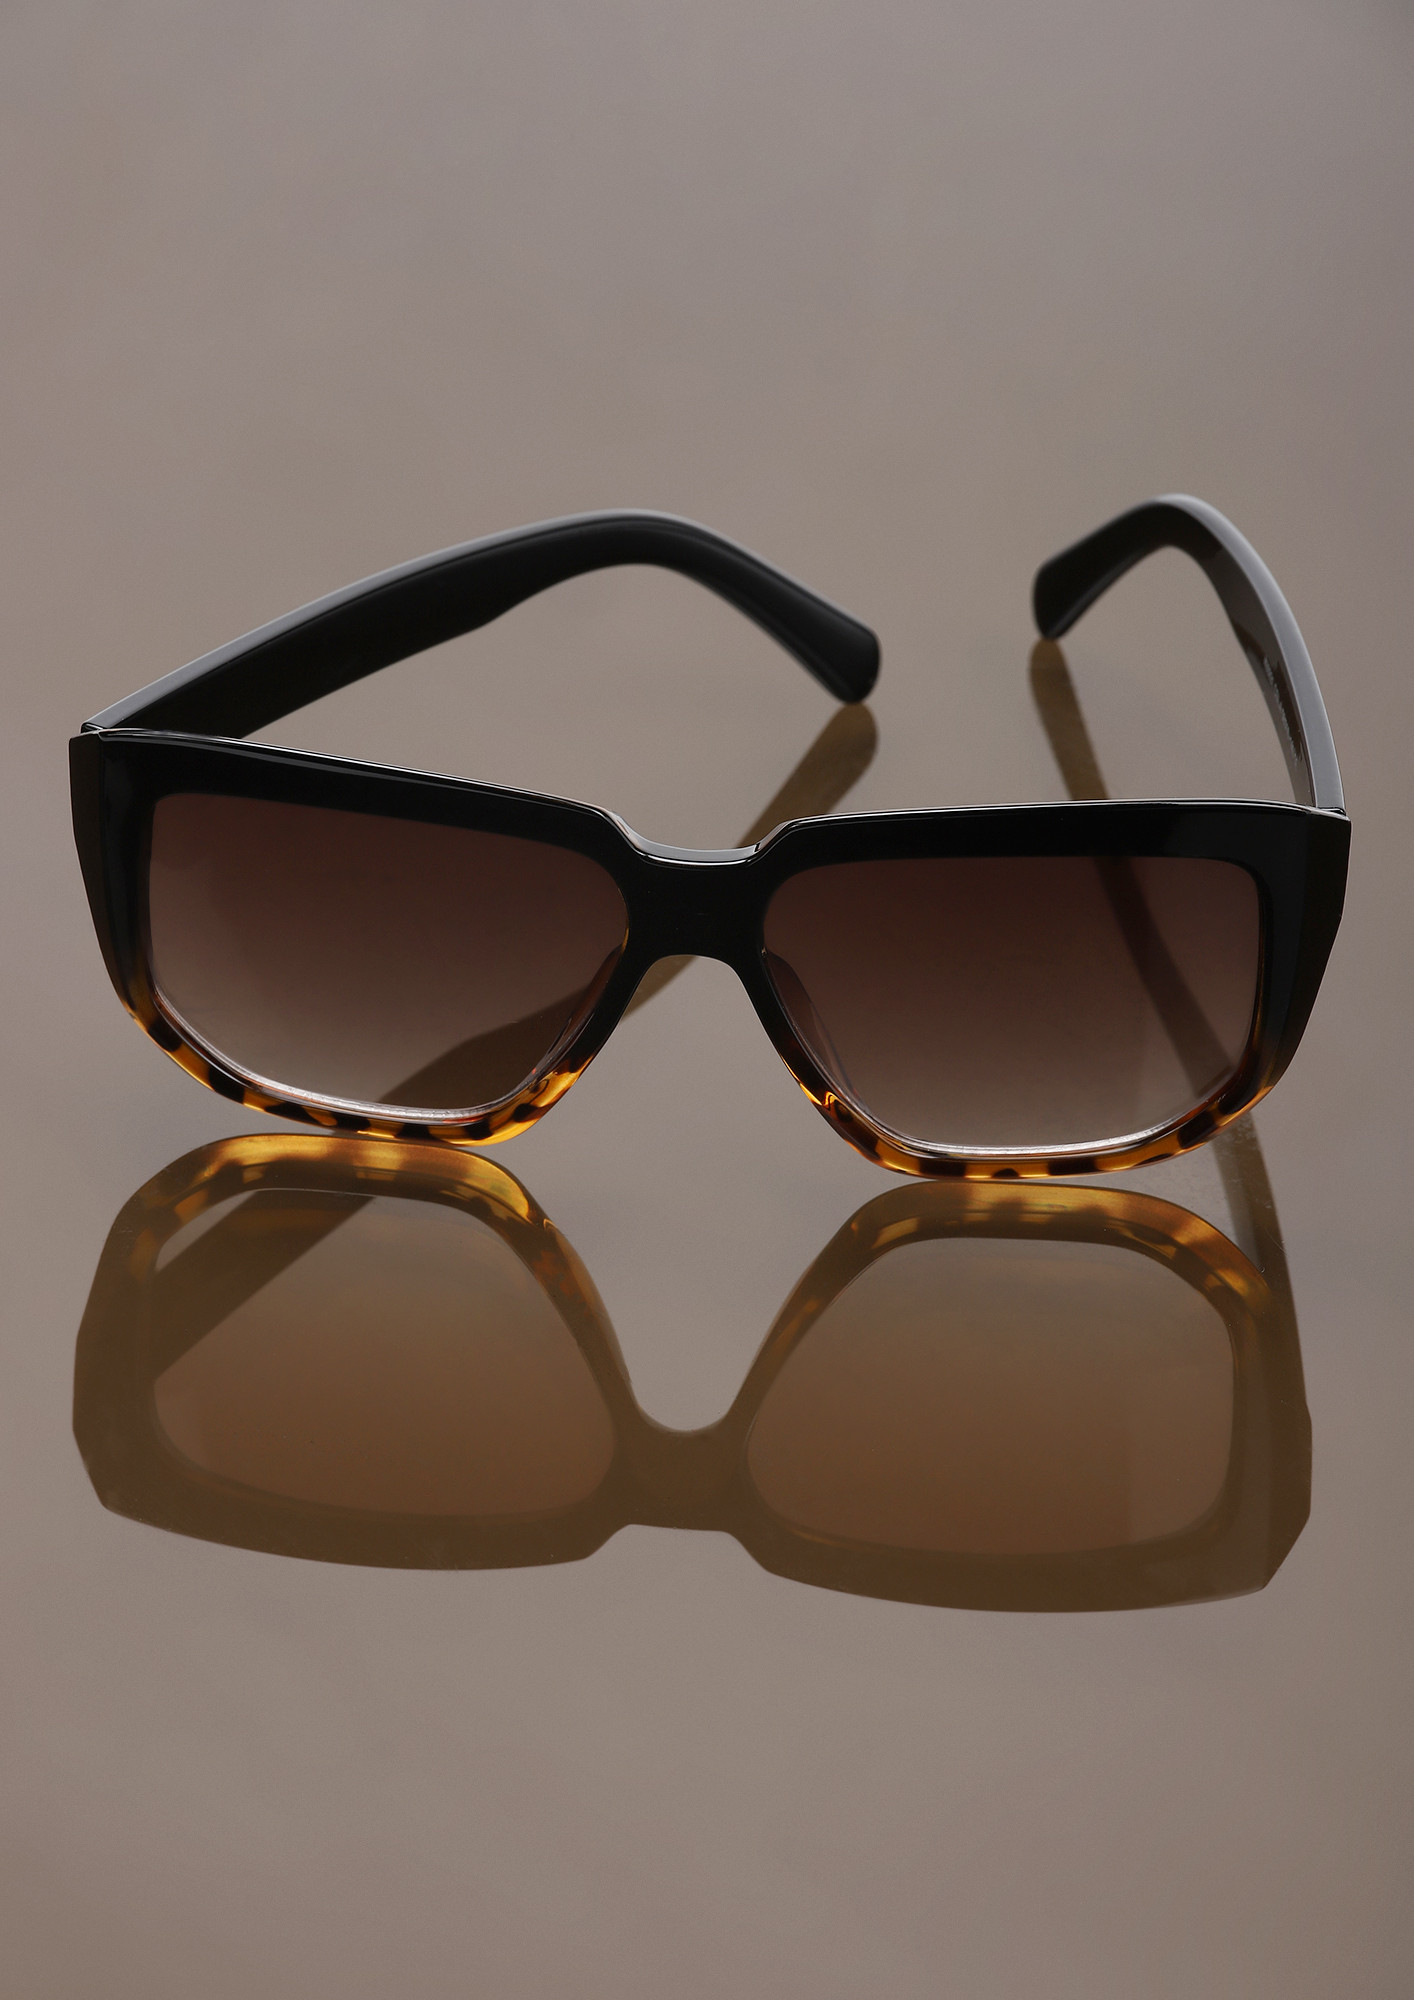 PRINT IS IN PLAY BLACK AMBER SQUARE FRAME SUNGLASSES